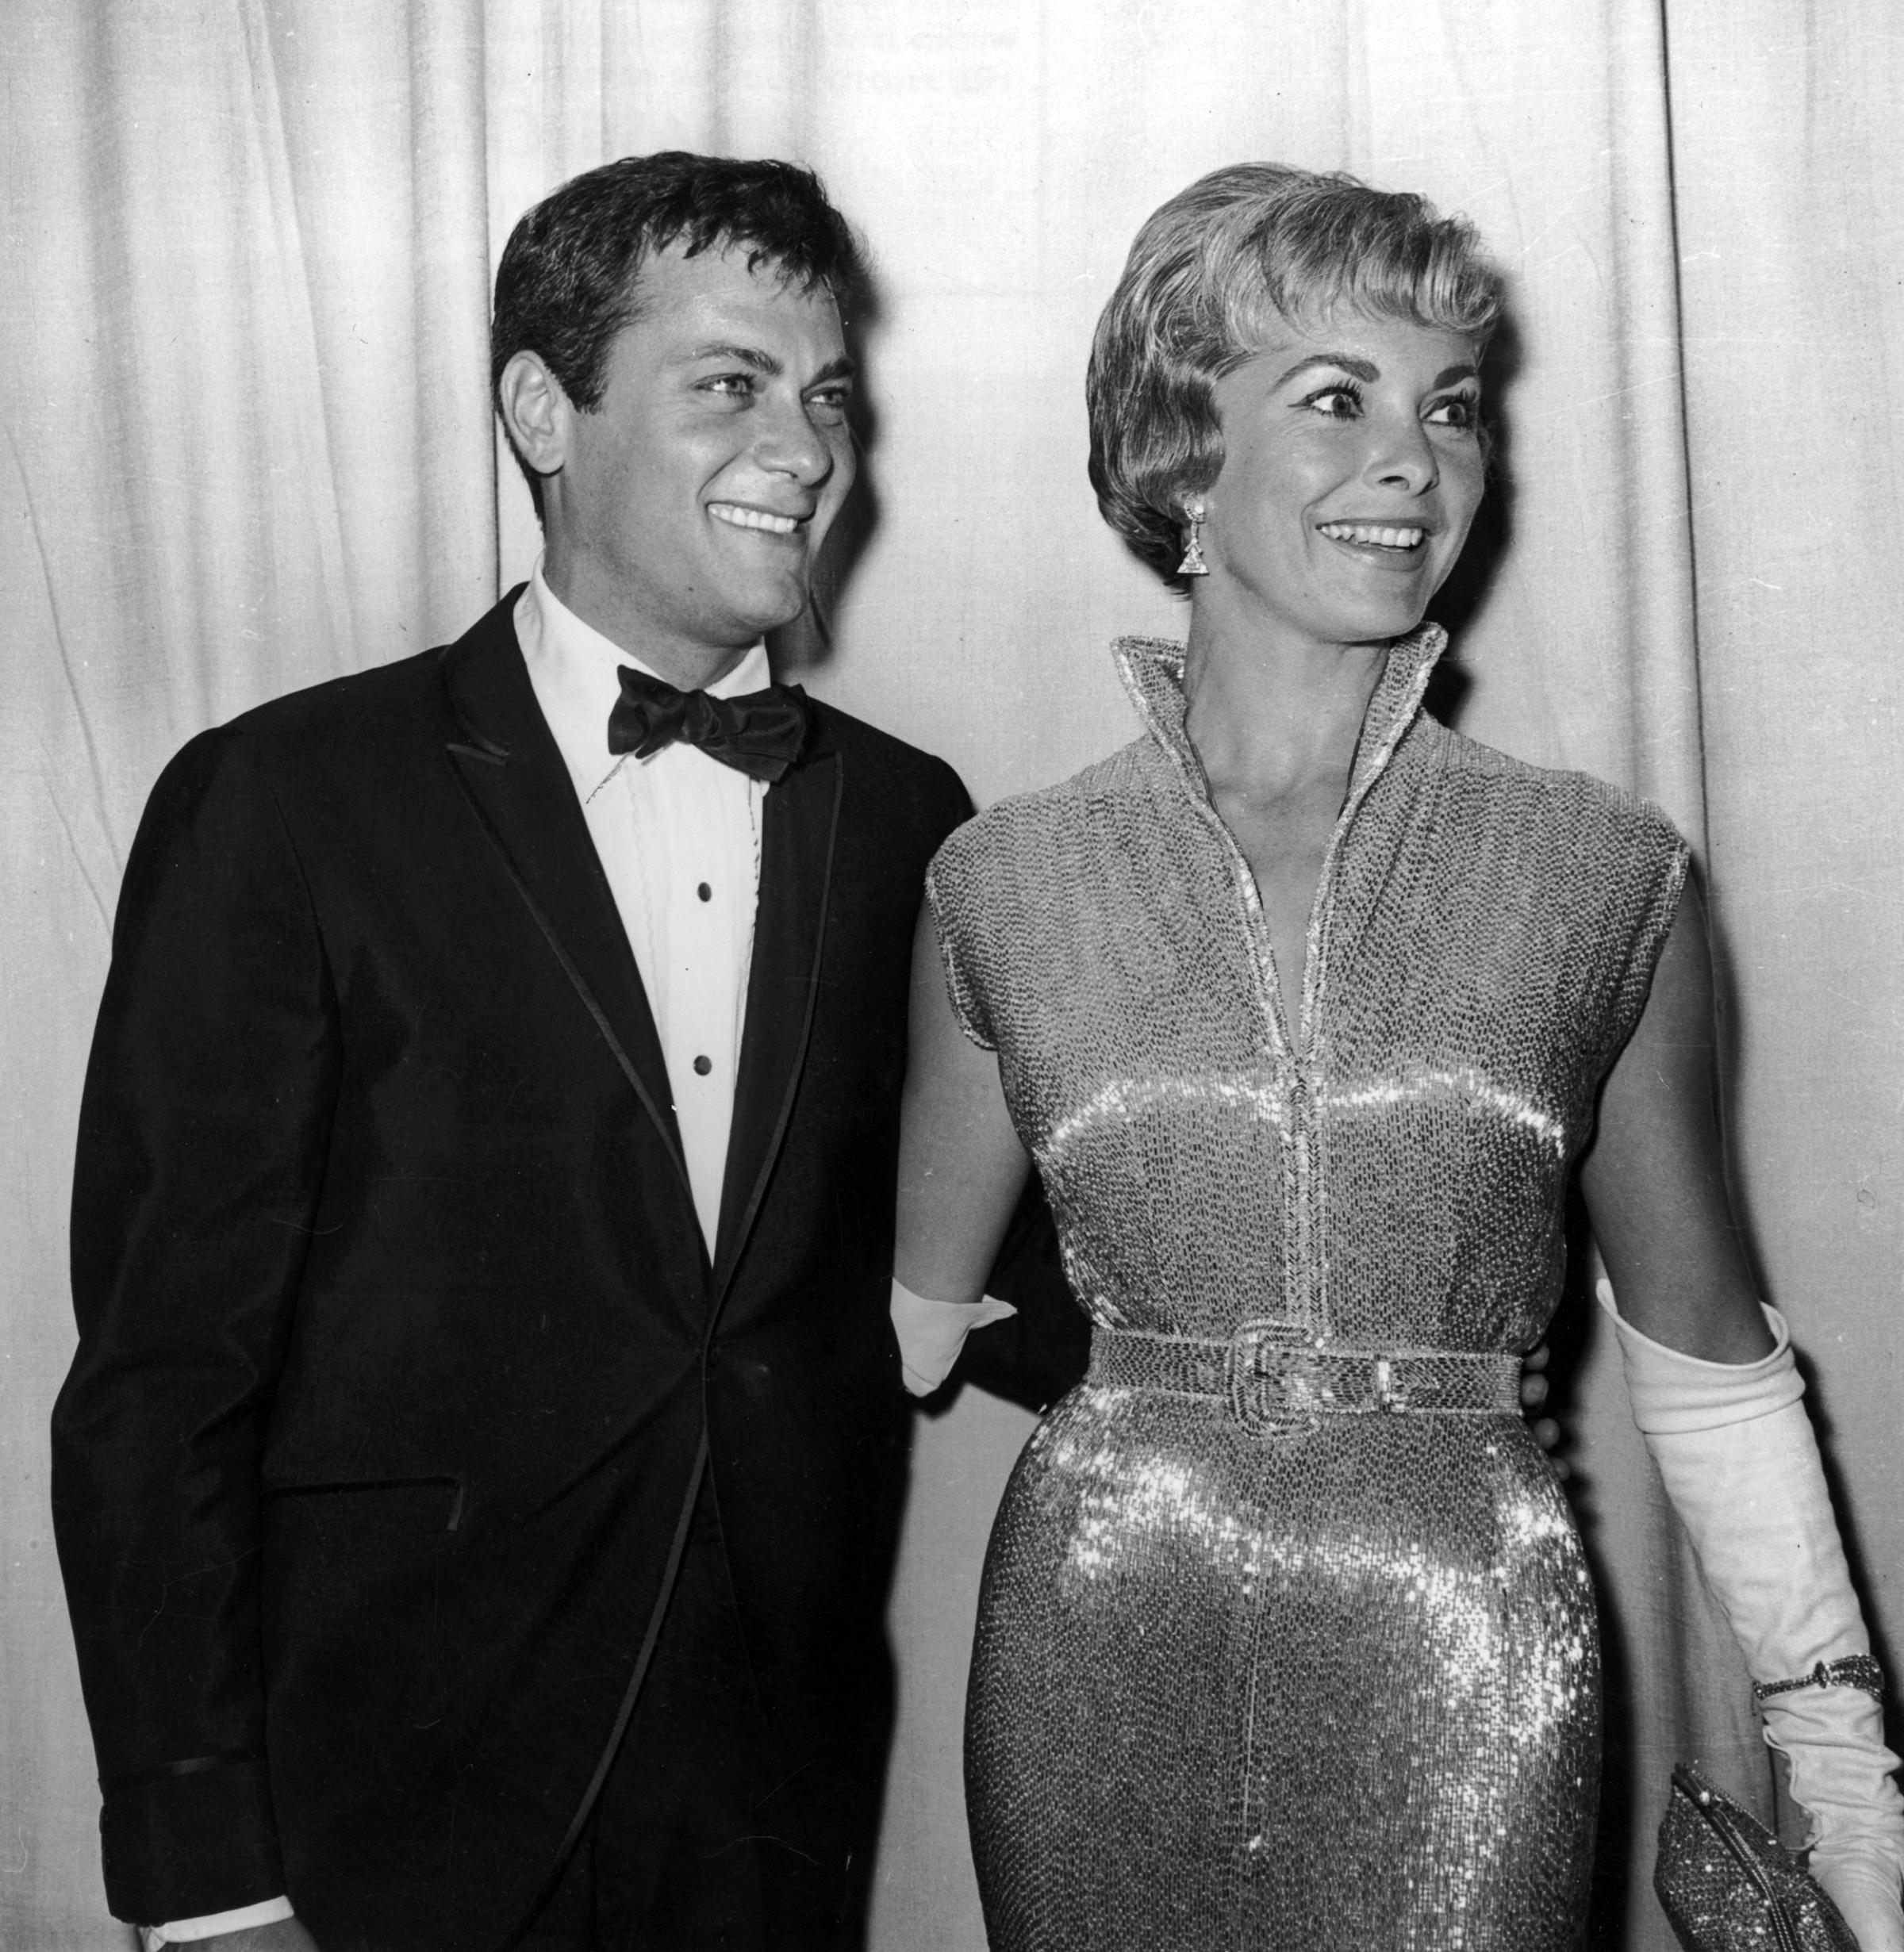 Tony Curtis and Janet Leigh at the Academy Awards, 1960.